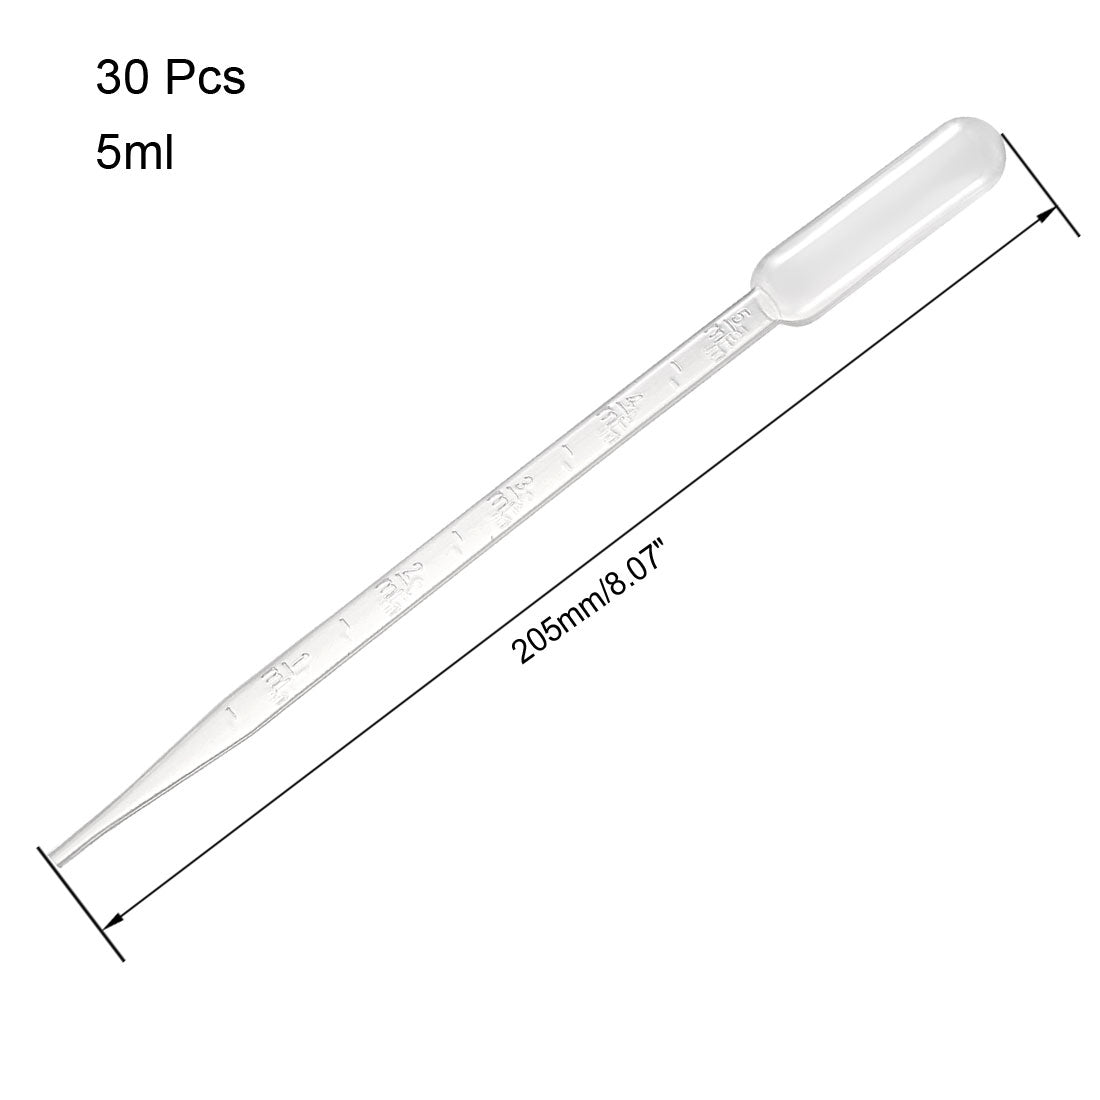 uxcell Uxcell 30 Pcs 5ml Disposable Pasteur Pipettes Test Tubes Liquid Drop Droppers Graduated 205mm Long